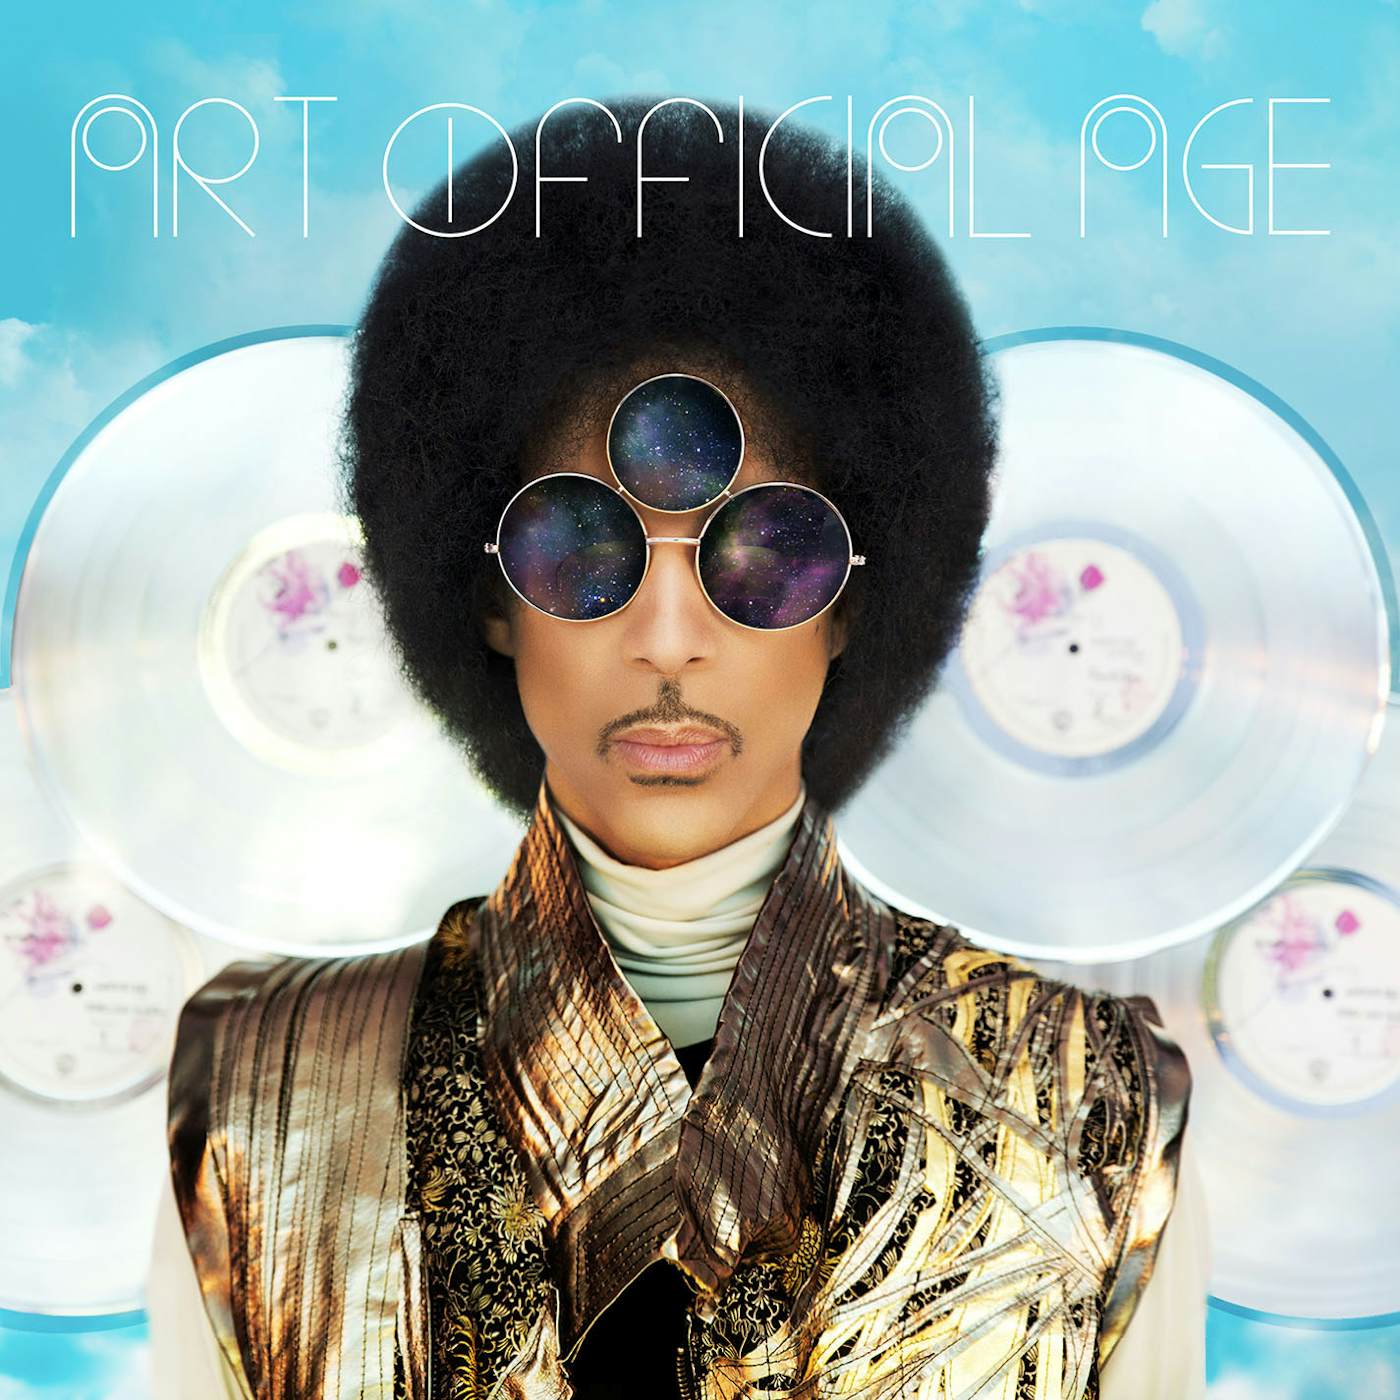 Prince Art Official Age Vinyl Record